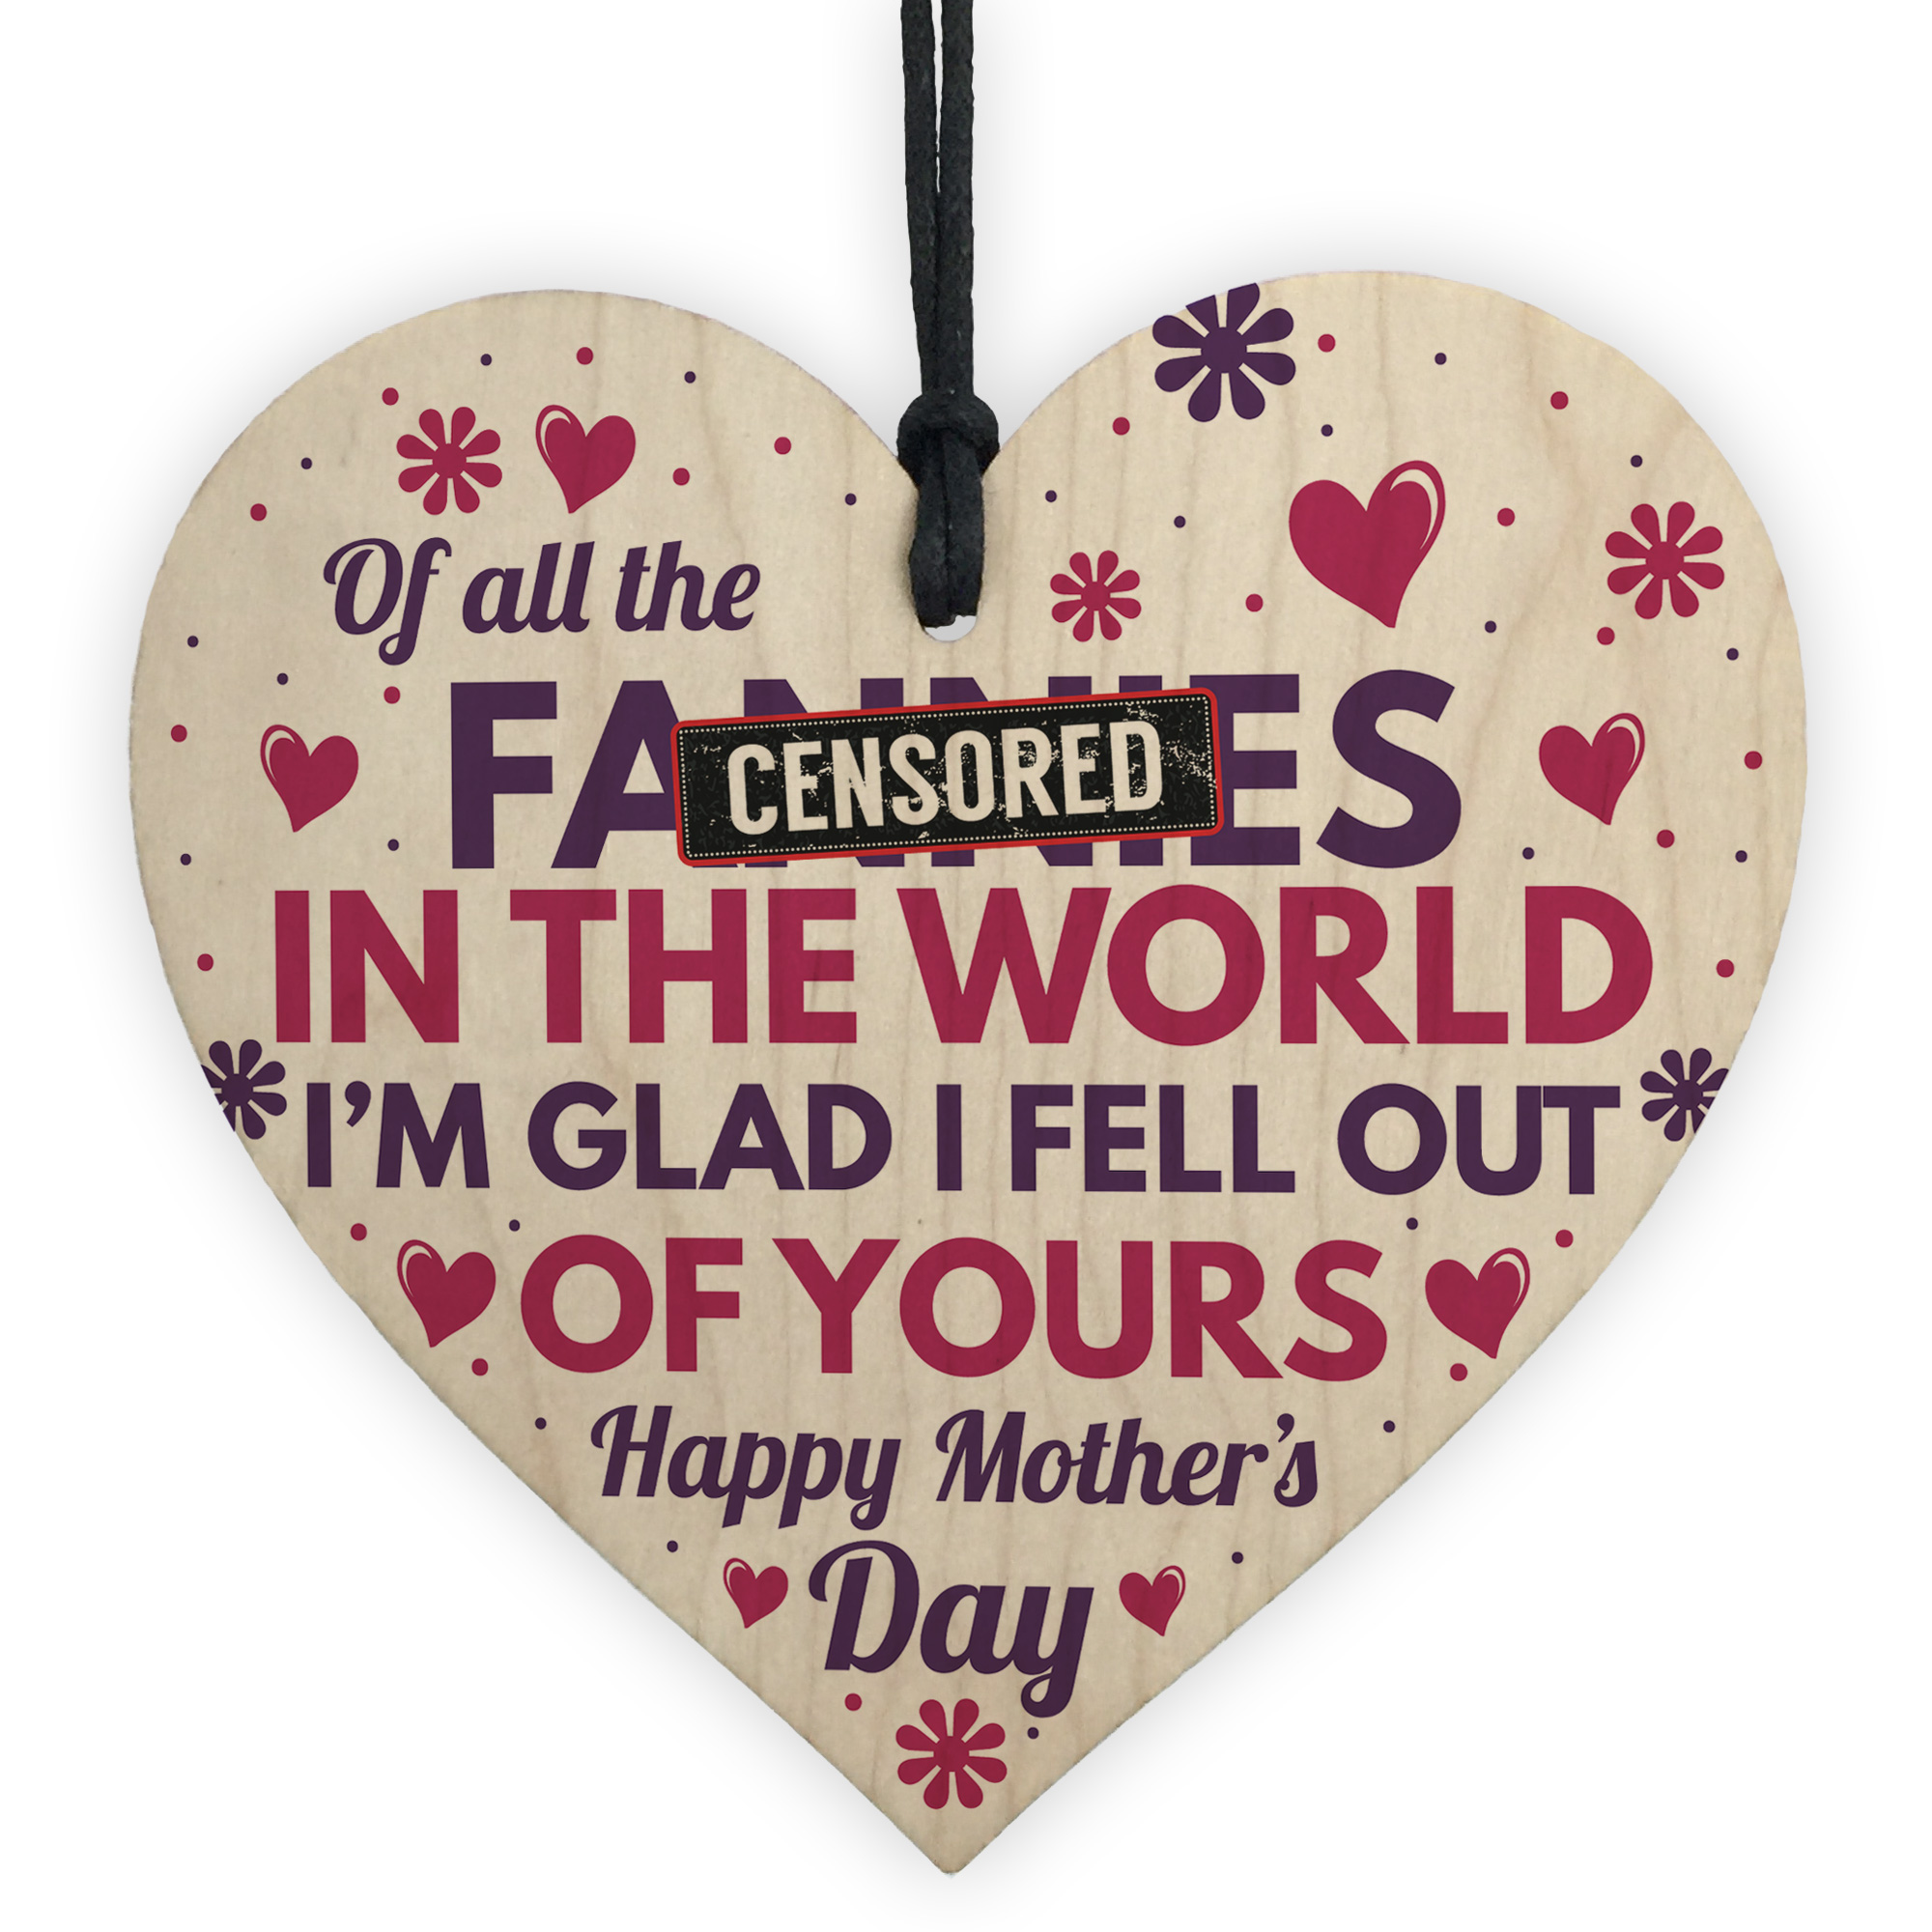 Funny Rude Mothers Day Gifts Novelty Wooden Heart Gift For Mum Daughter Son 5056293513388 Ebay,How To Install Smoke Detector Battery